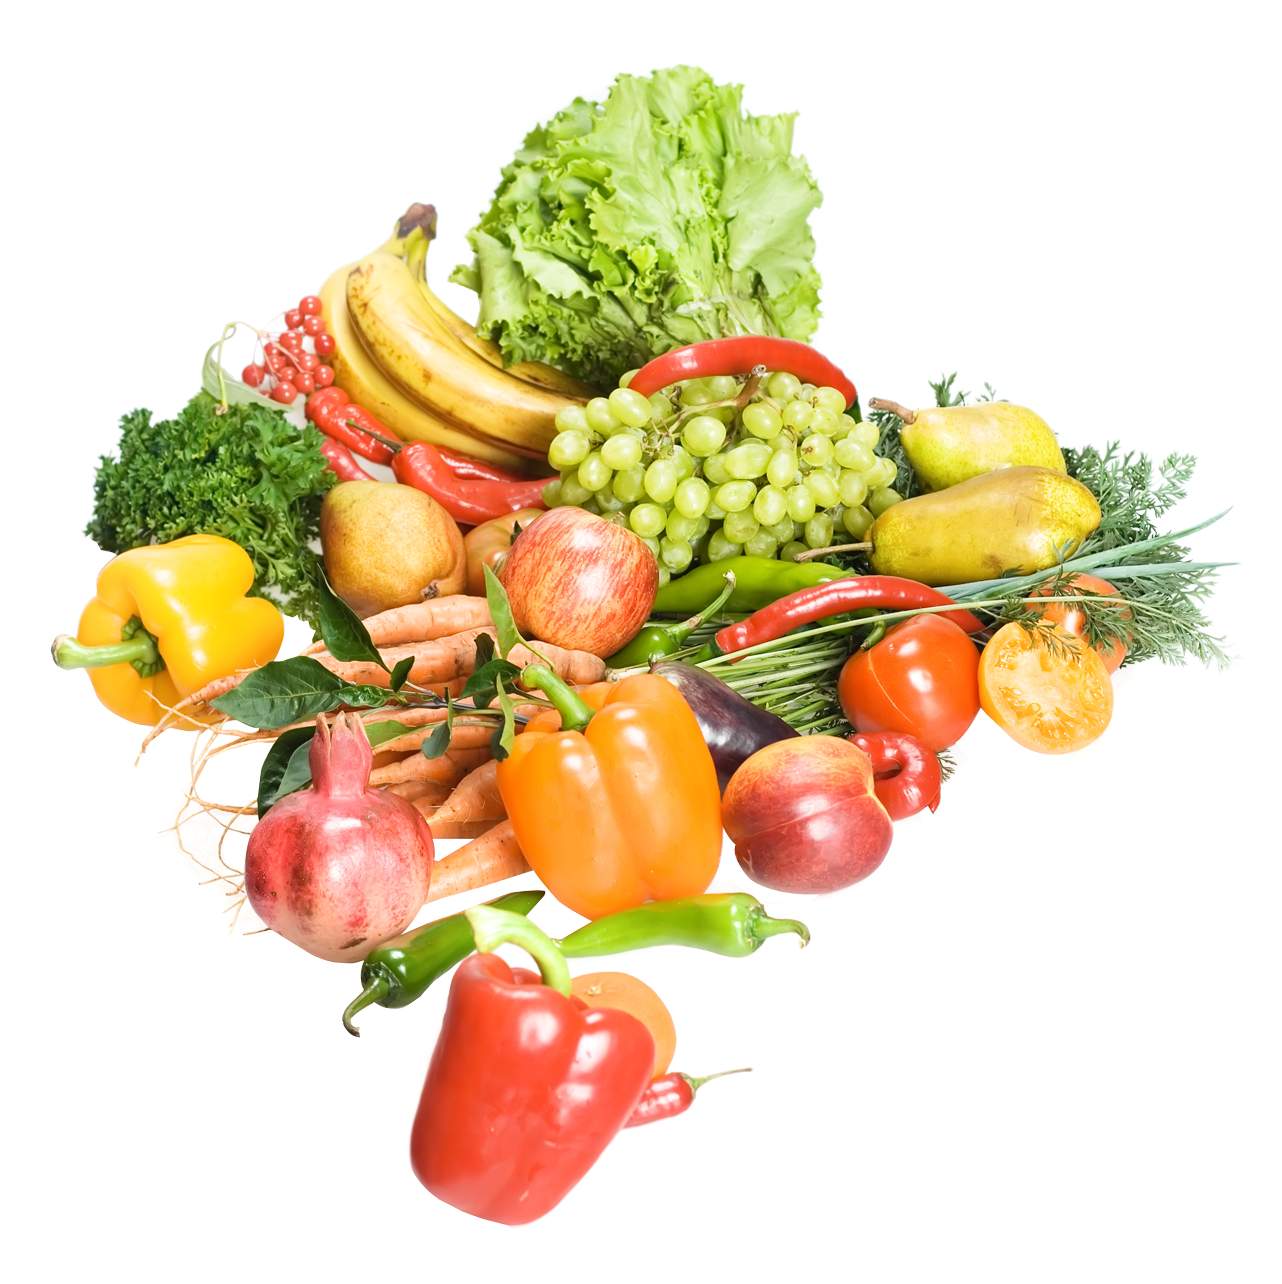 A Pile Of Fruits And Vegetables